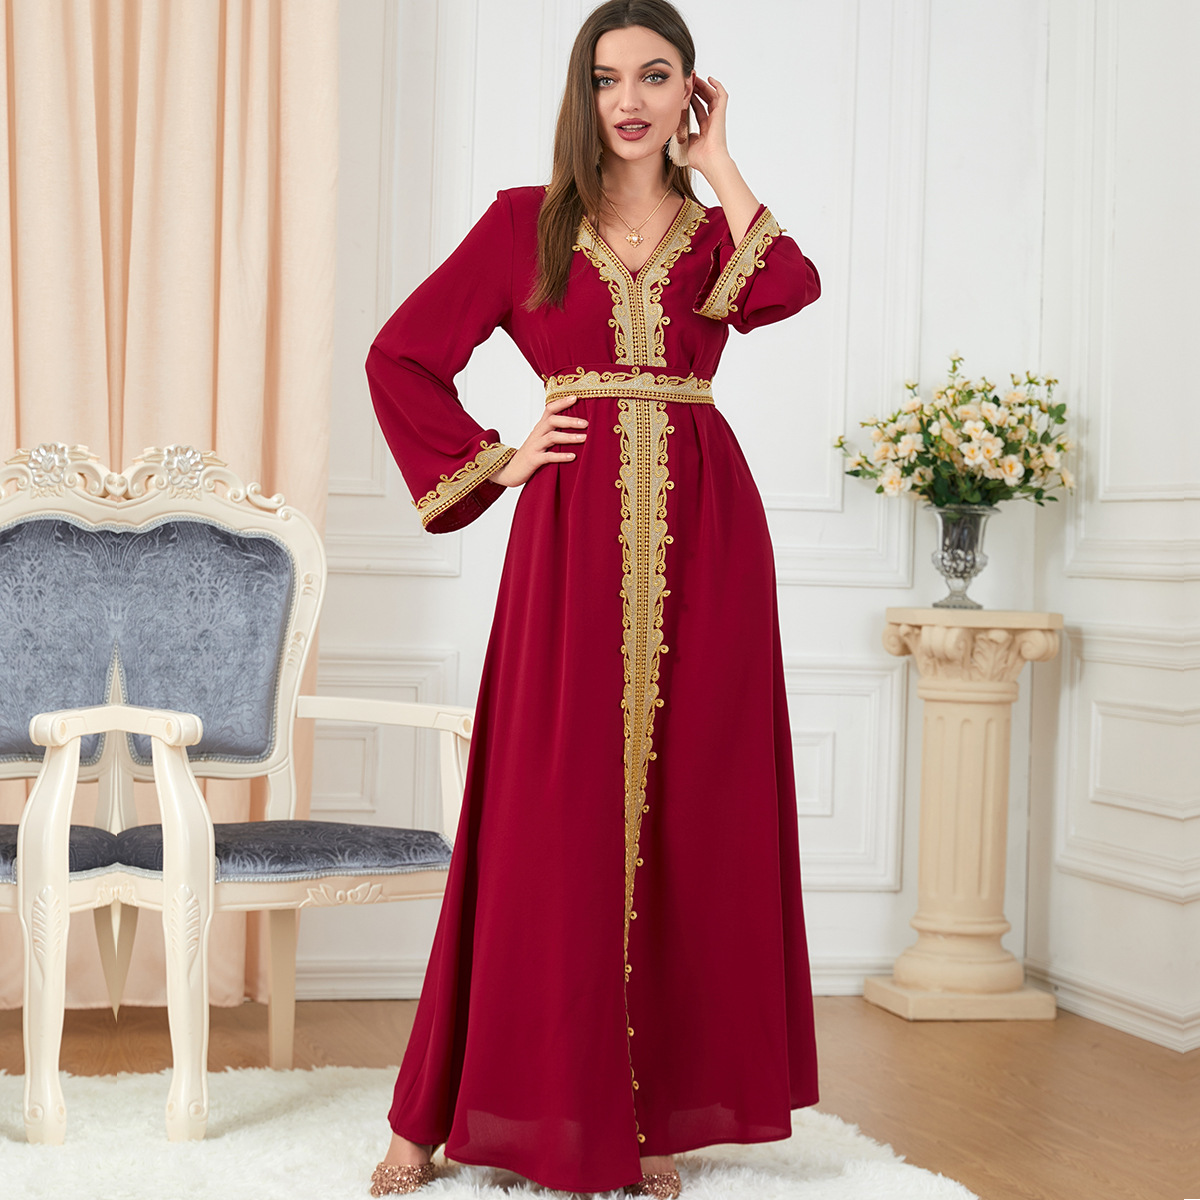 a woman wering solid color embroidery long-sleeved dress full length views